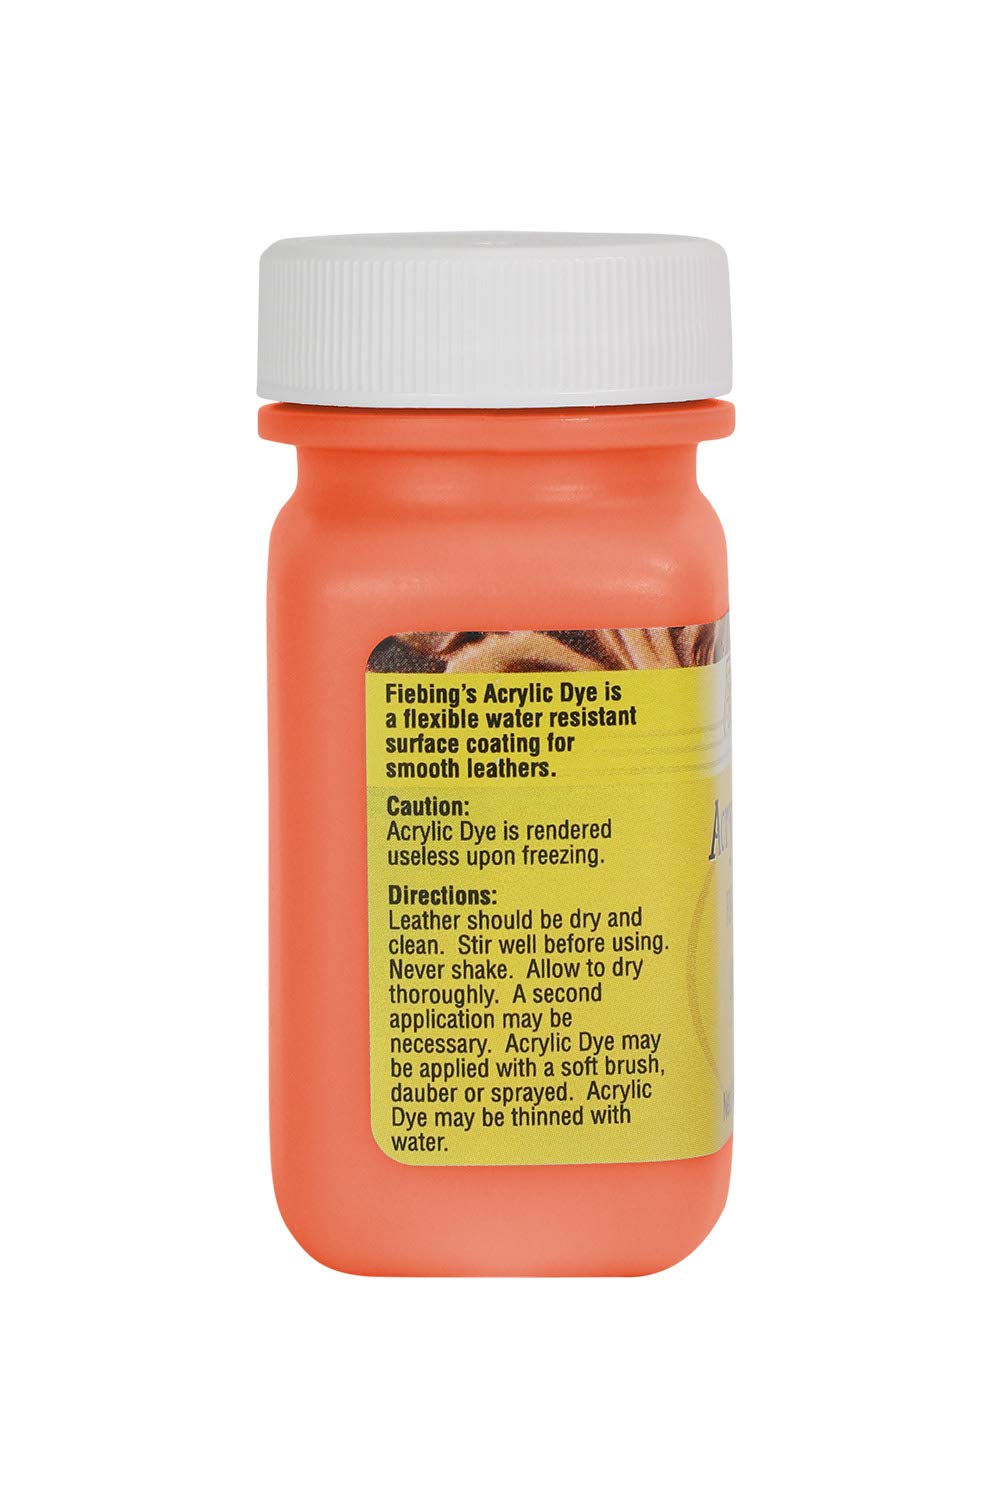 Fiebing's 2 Oz Acrylic Dye - Orange - for Painting Leather Shoes, Bags, Designs, Scratches, Upholstery, etc